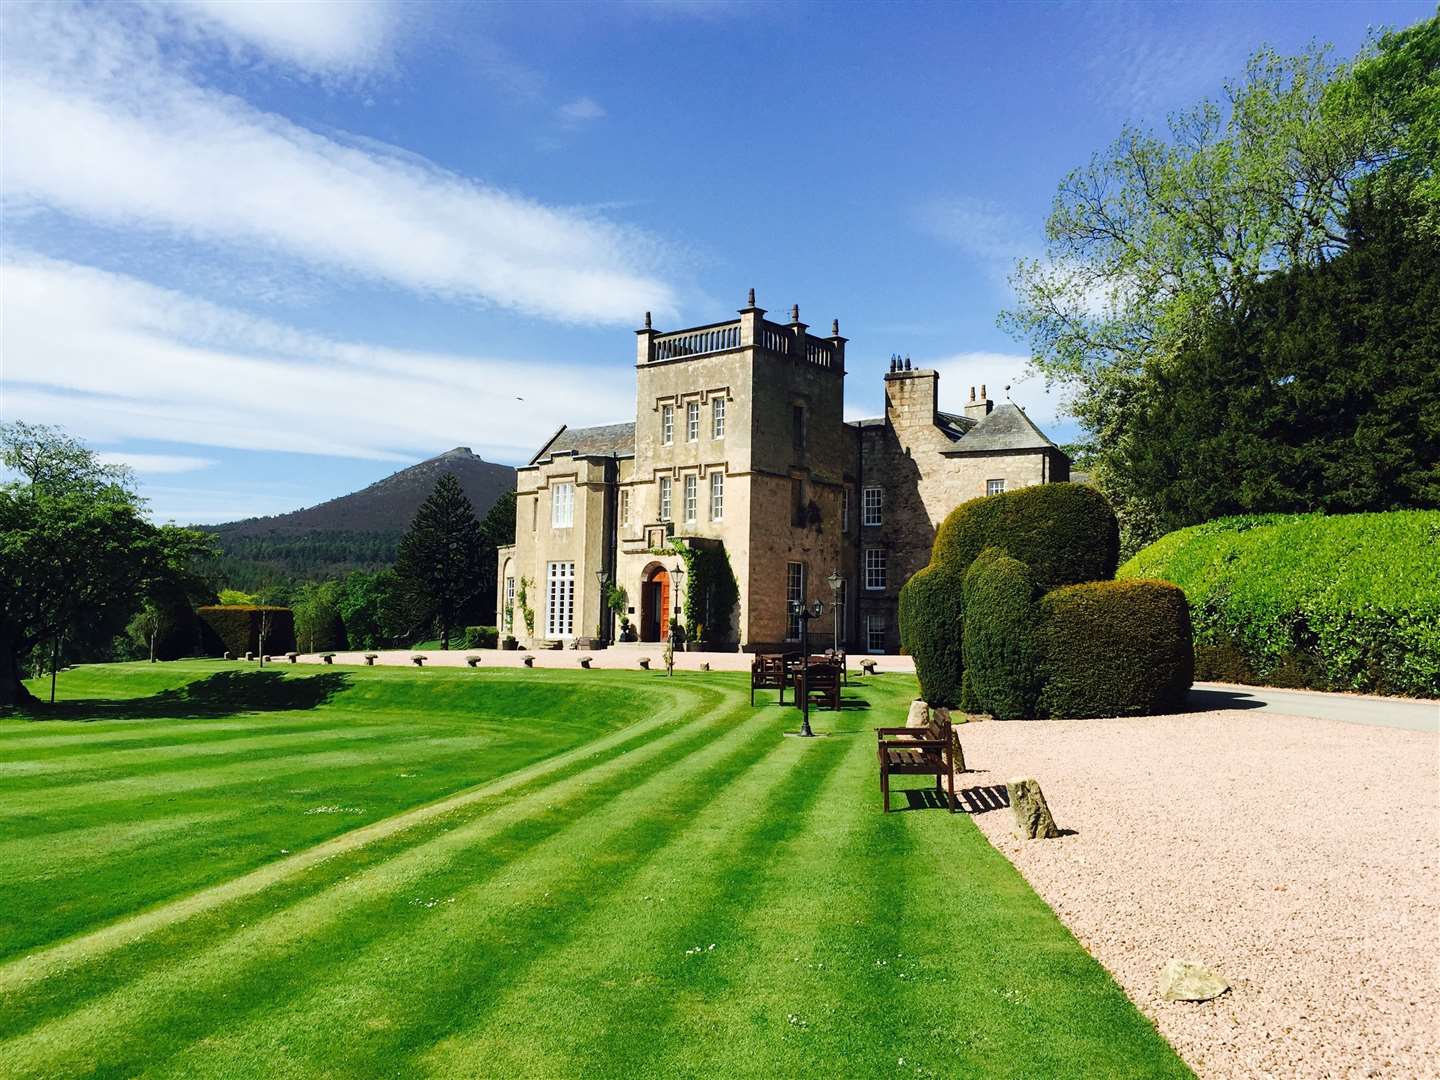 Macdonald Pittodrie House is a stunning setting for your big day.